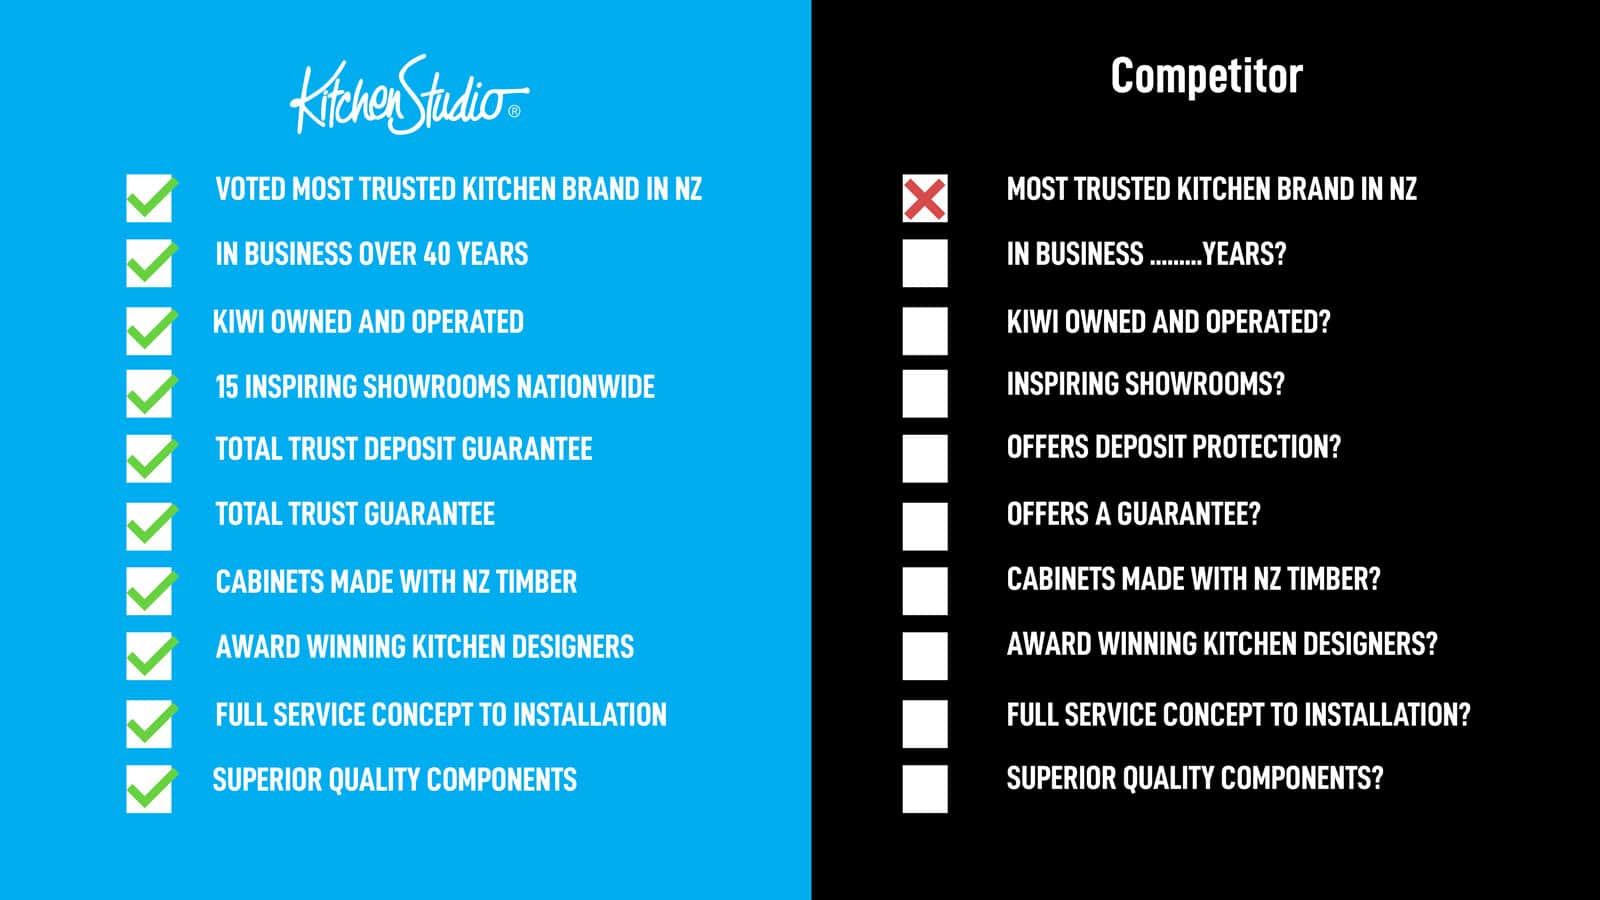 Download the 'Choosing a Kitchen Company Checklist' here